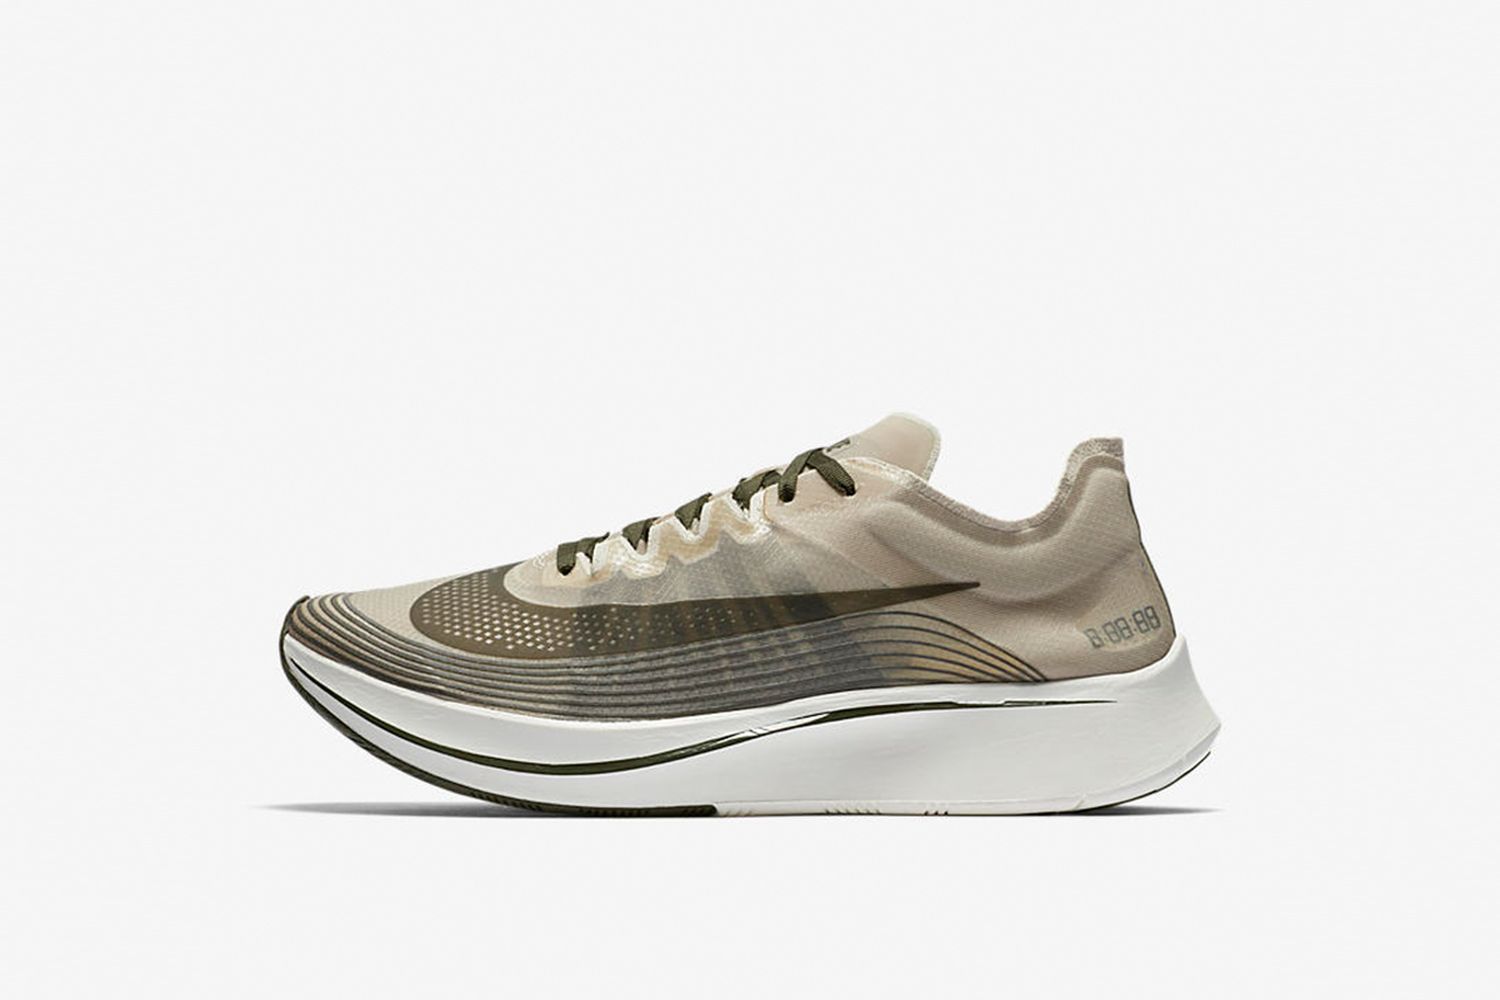 Zoom Fly